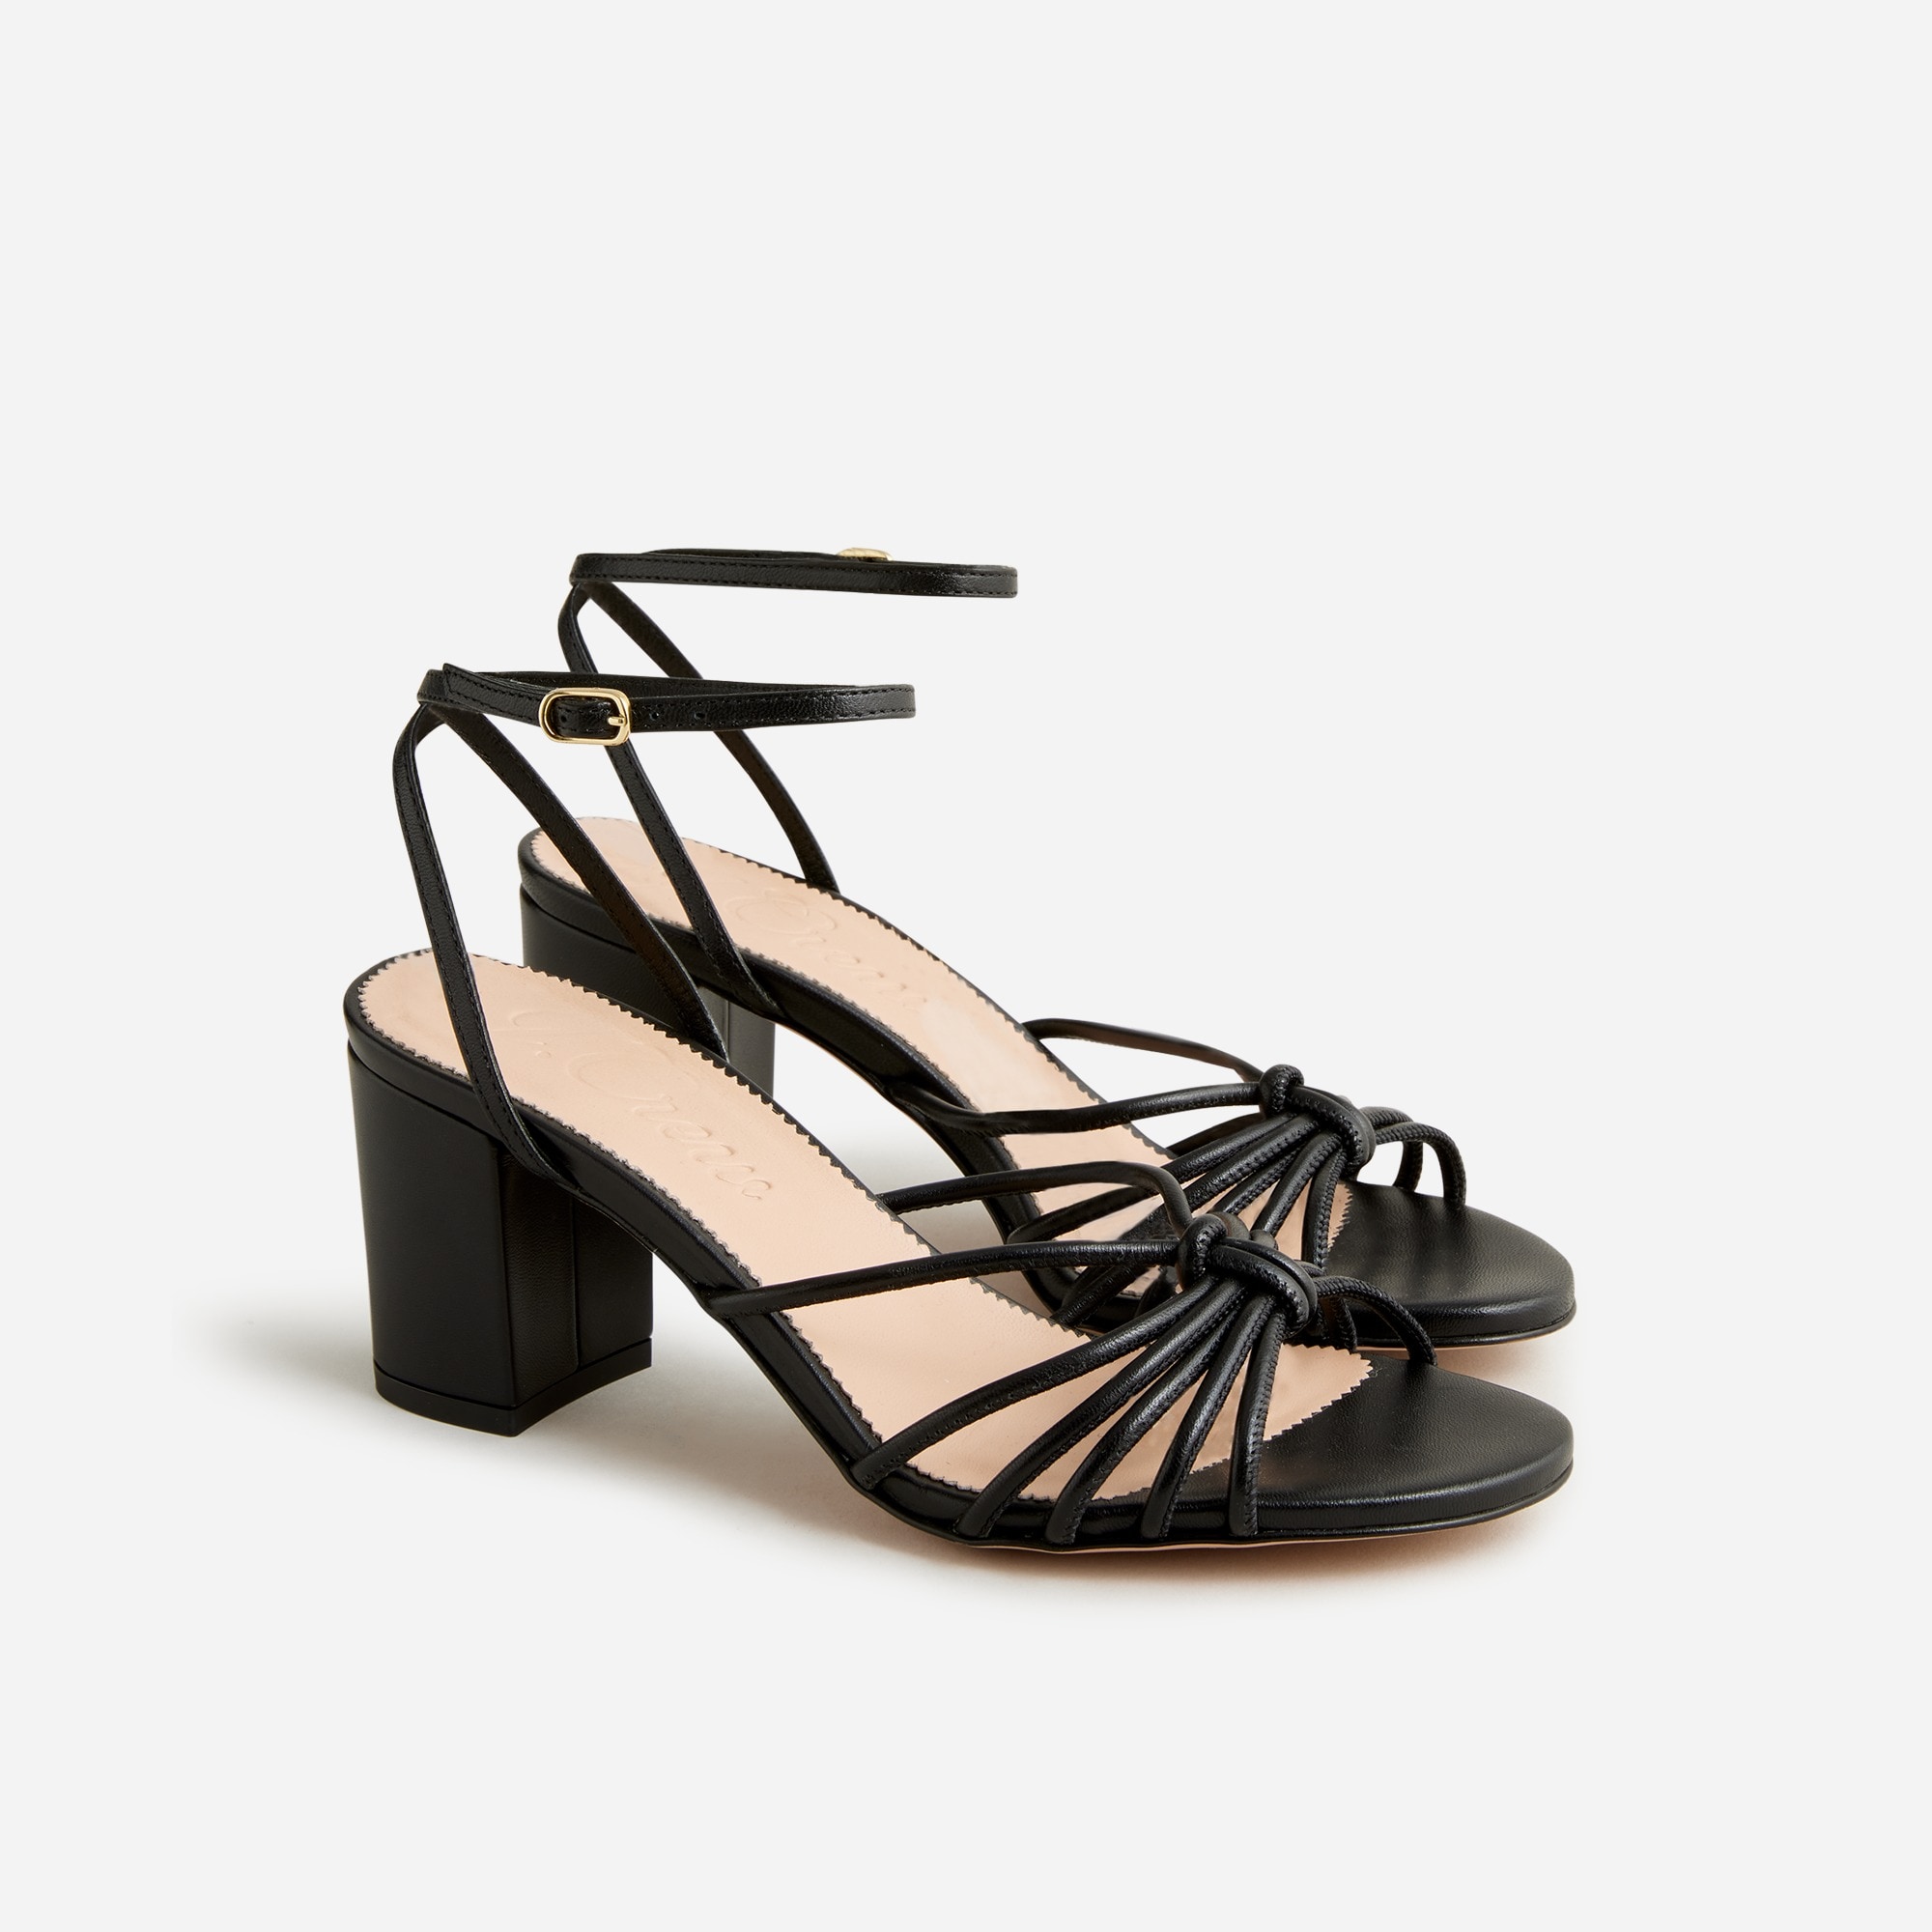  Lucie strappy block-heel sandals in Italian leather